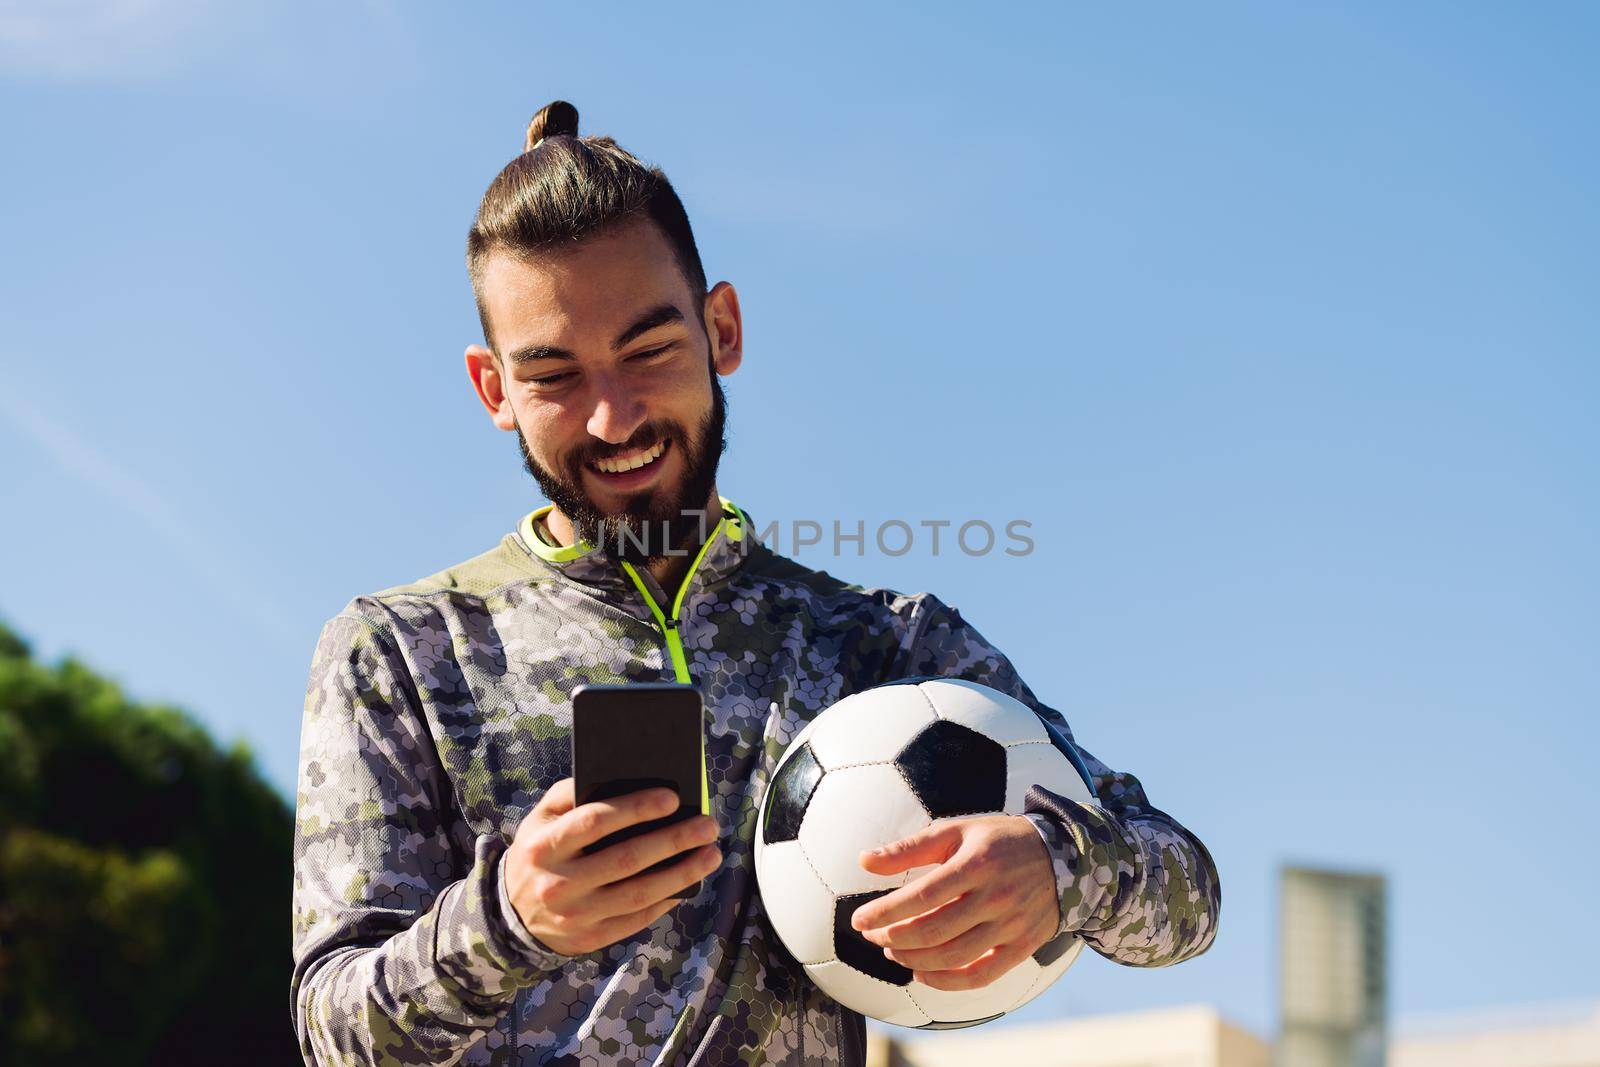 horizontal portrait of a happy sportsman with a soccer ball smiling looking his mobile phone, concept of technology and urban sport lifestyle in the city, copy space for text